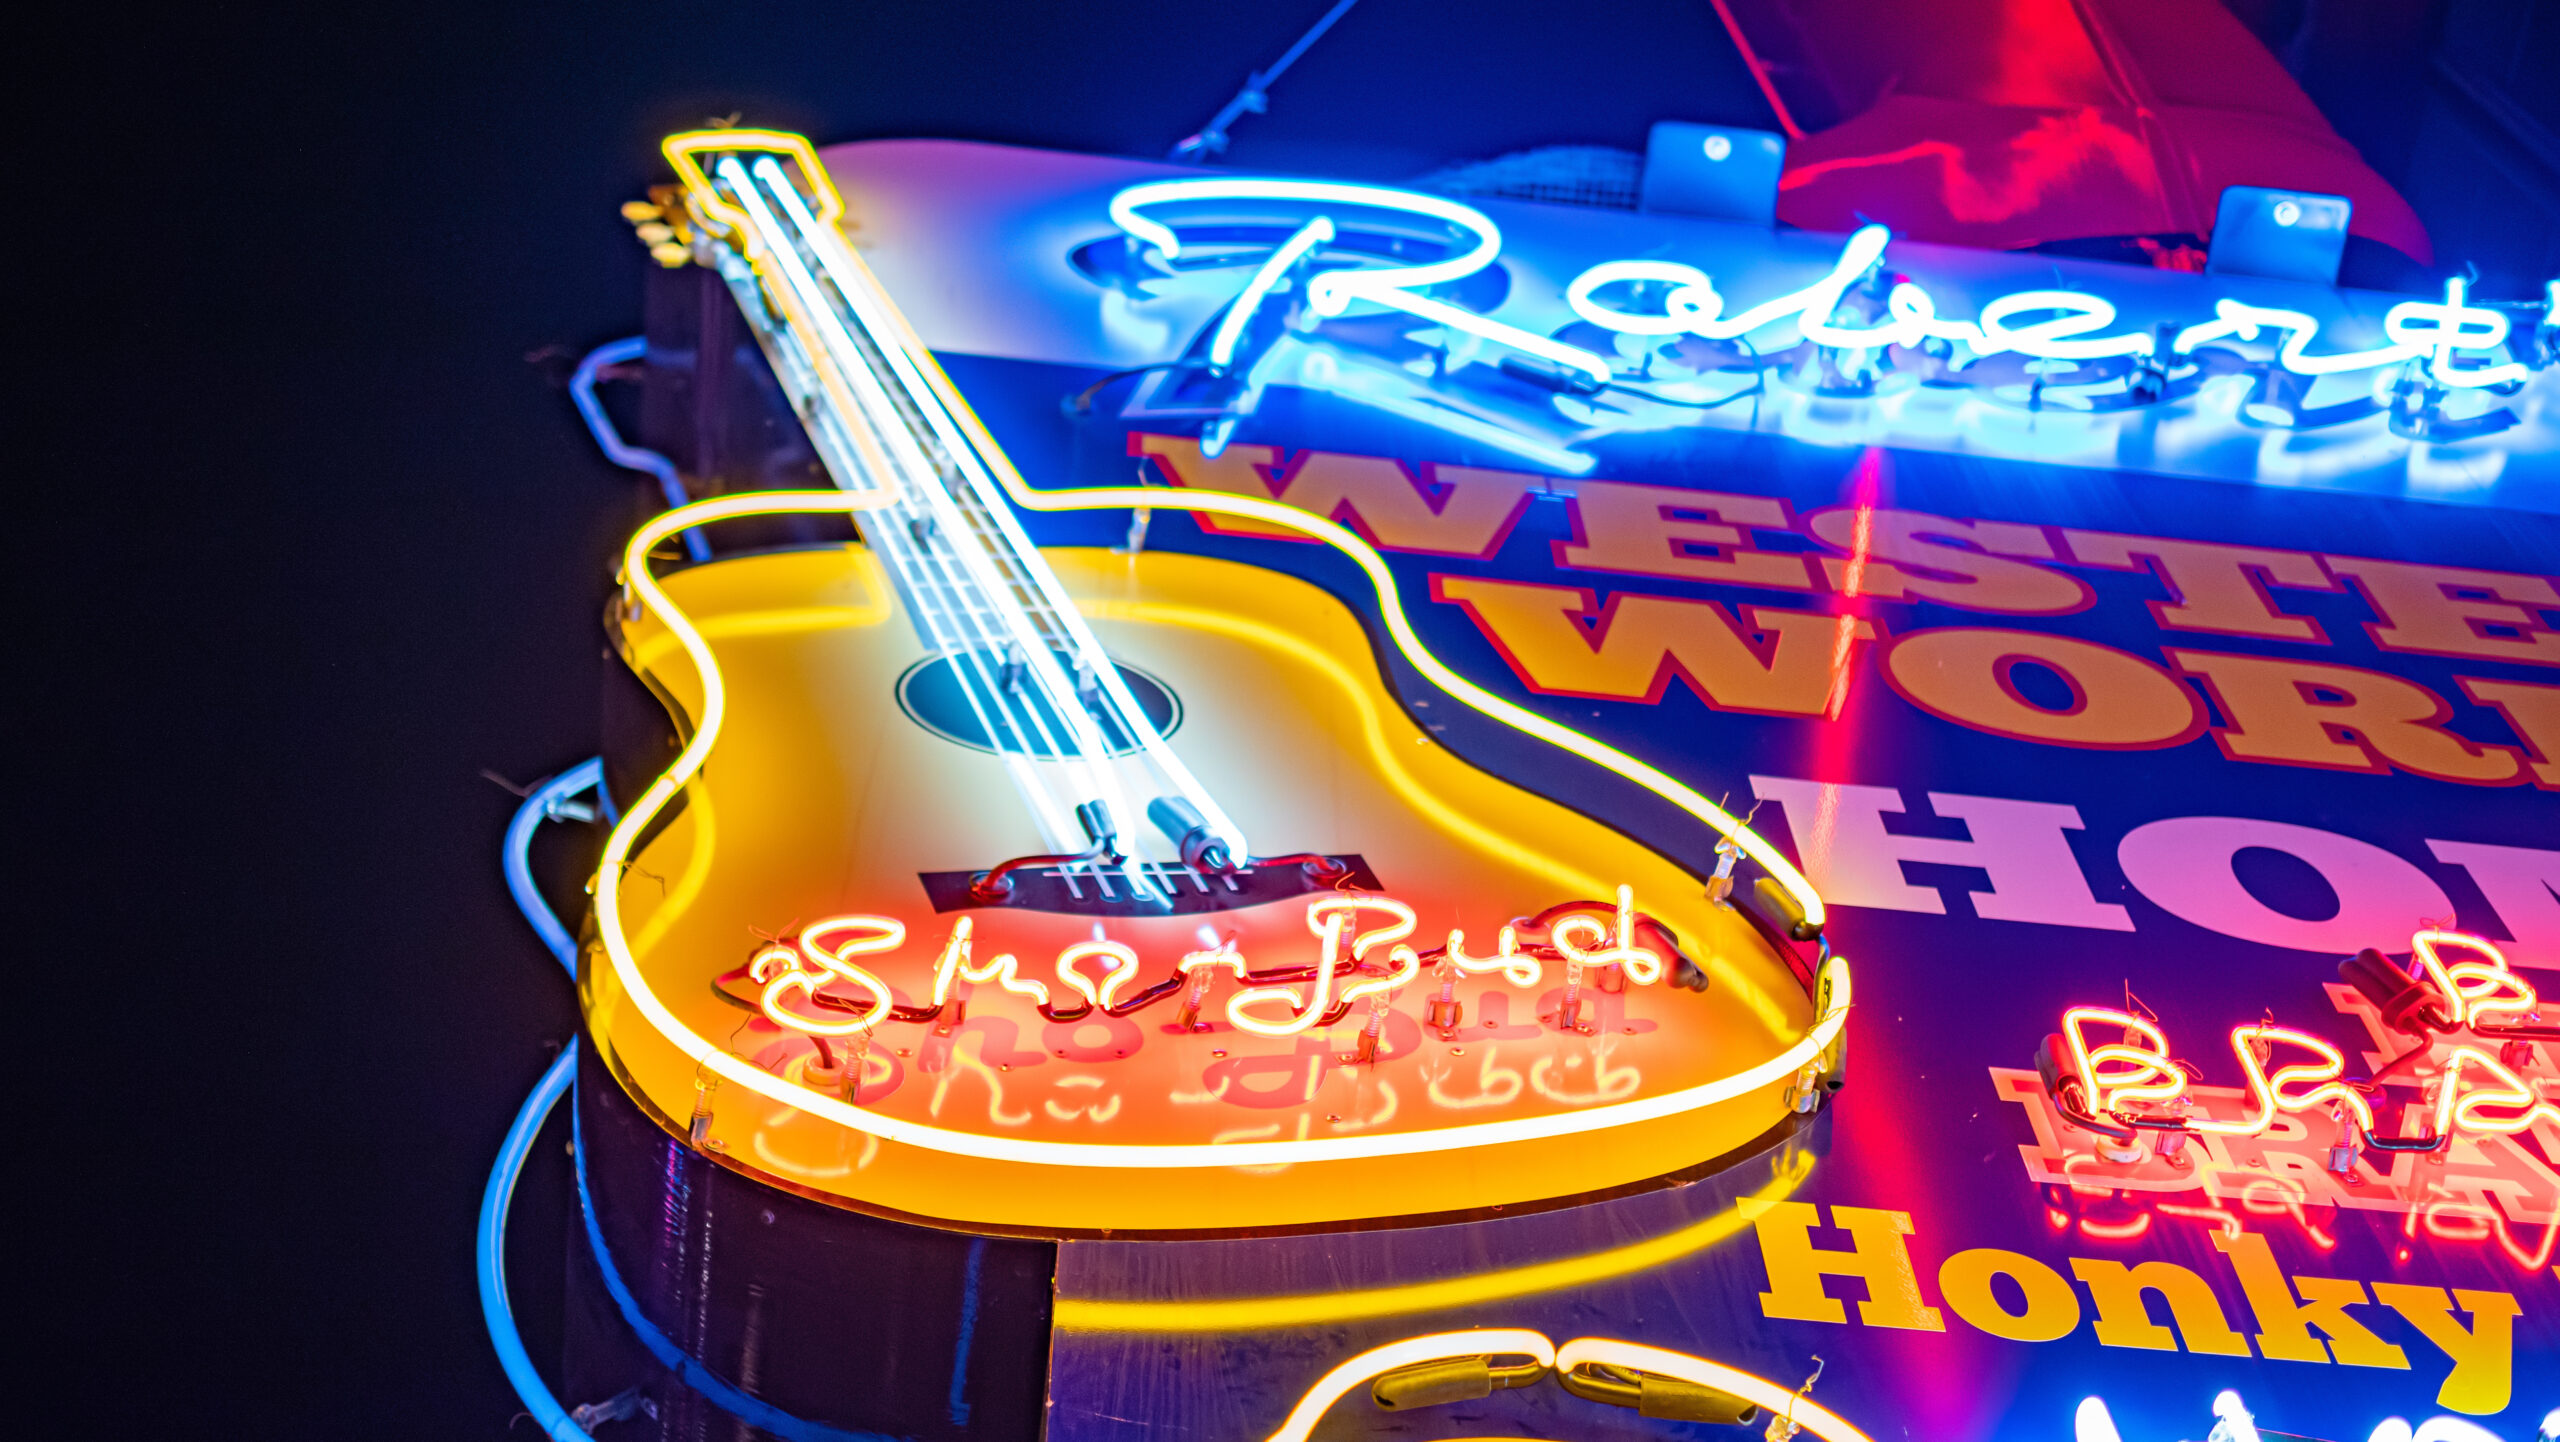 Colorful neon signs at Nashville Broadway - NASHVILLE, TENNESSEE - JUNE 15, 2019